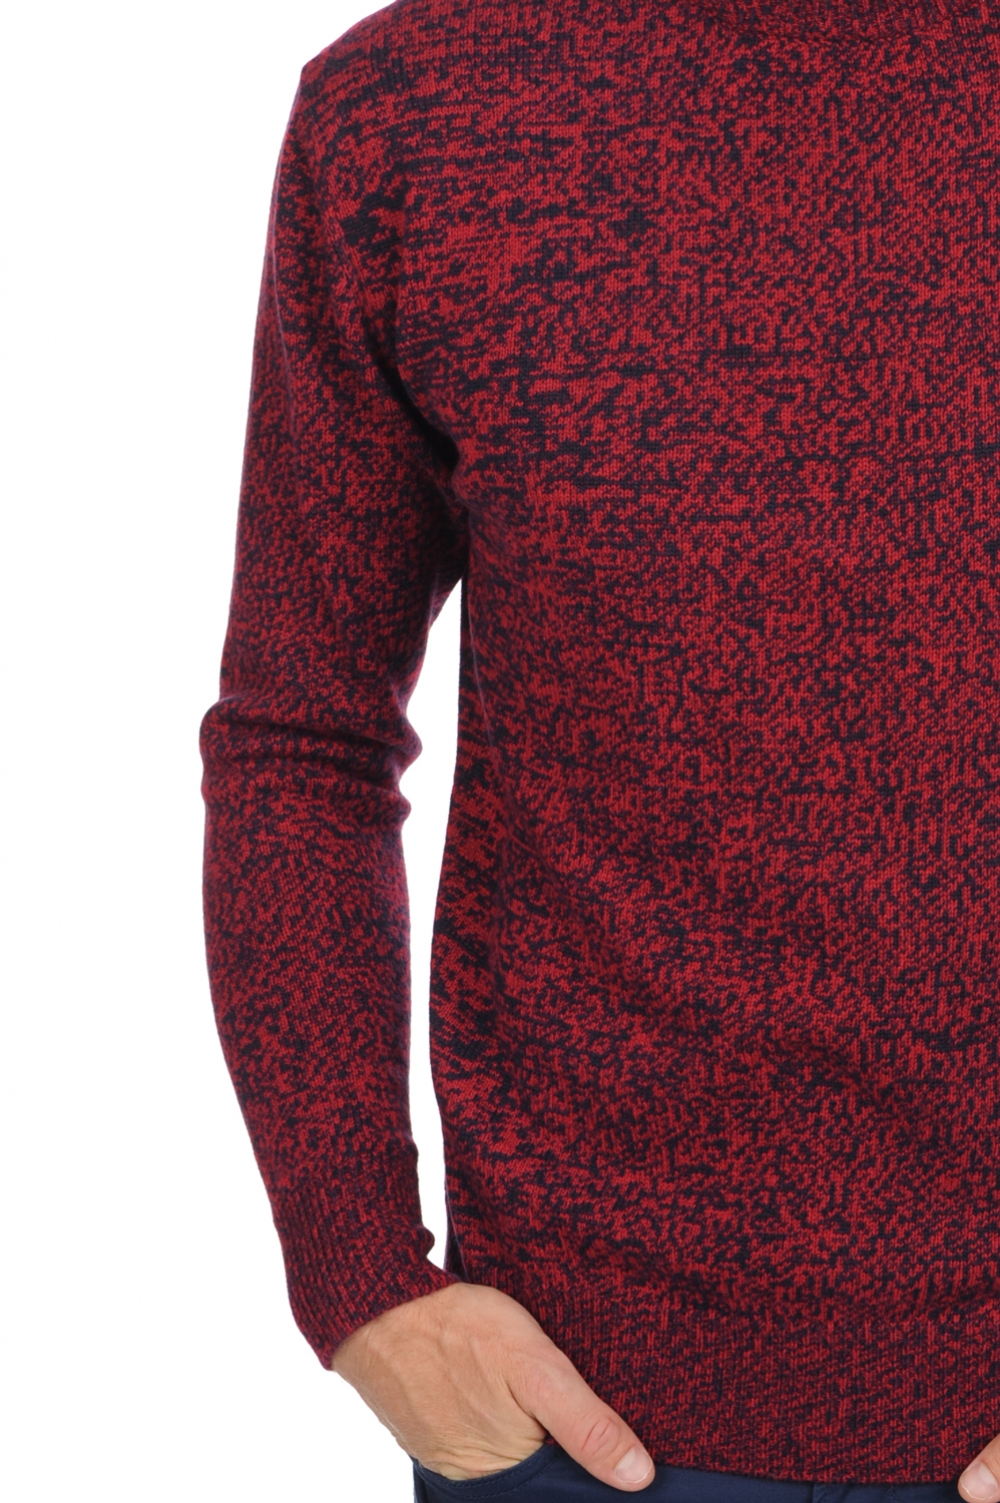 Cachemire pull homme col rond samwell disco m